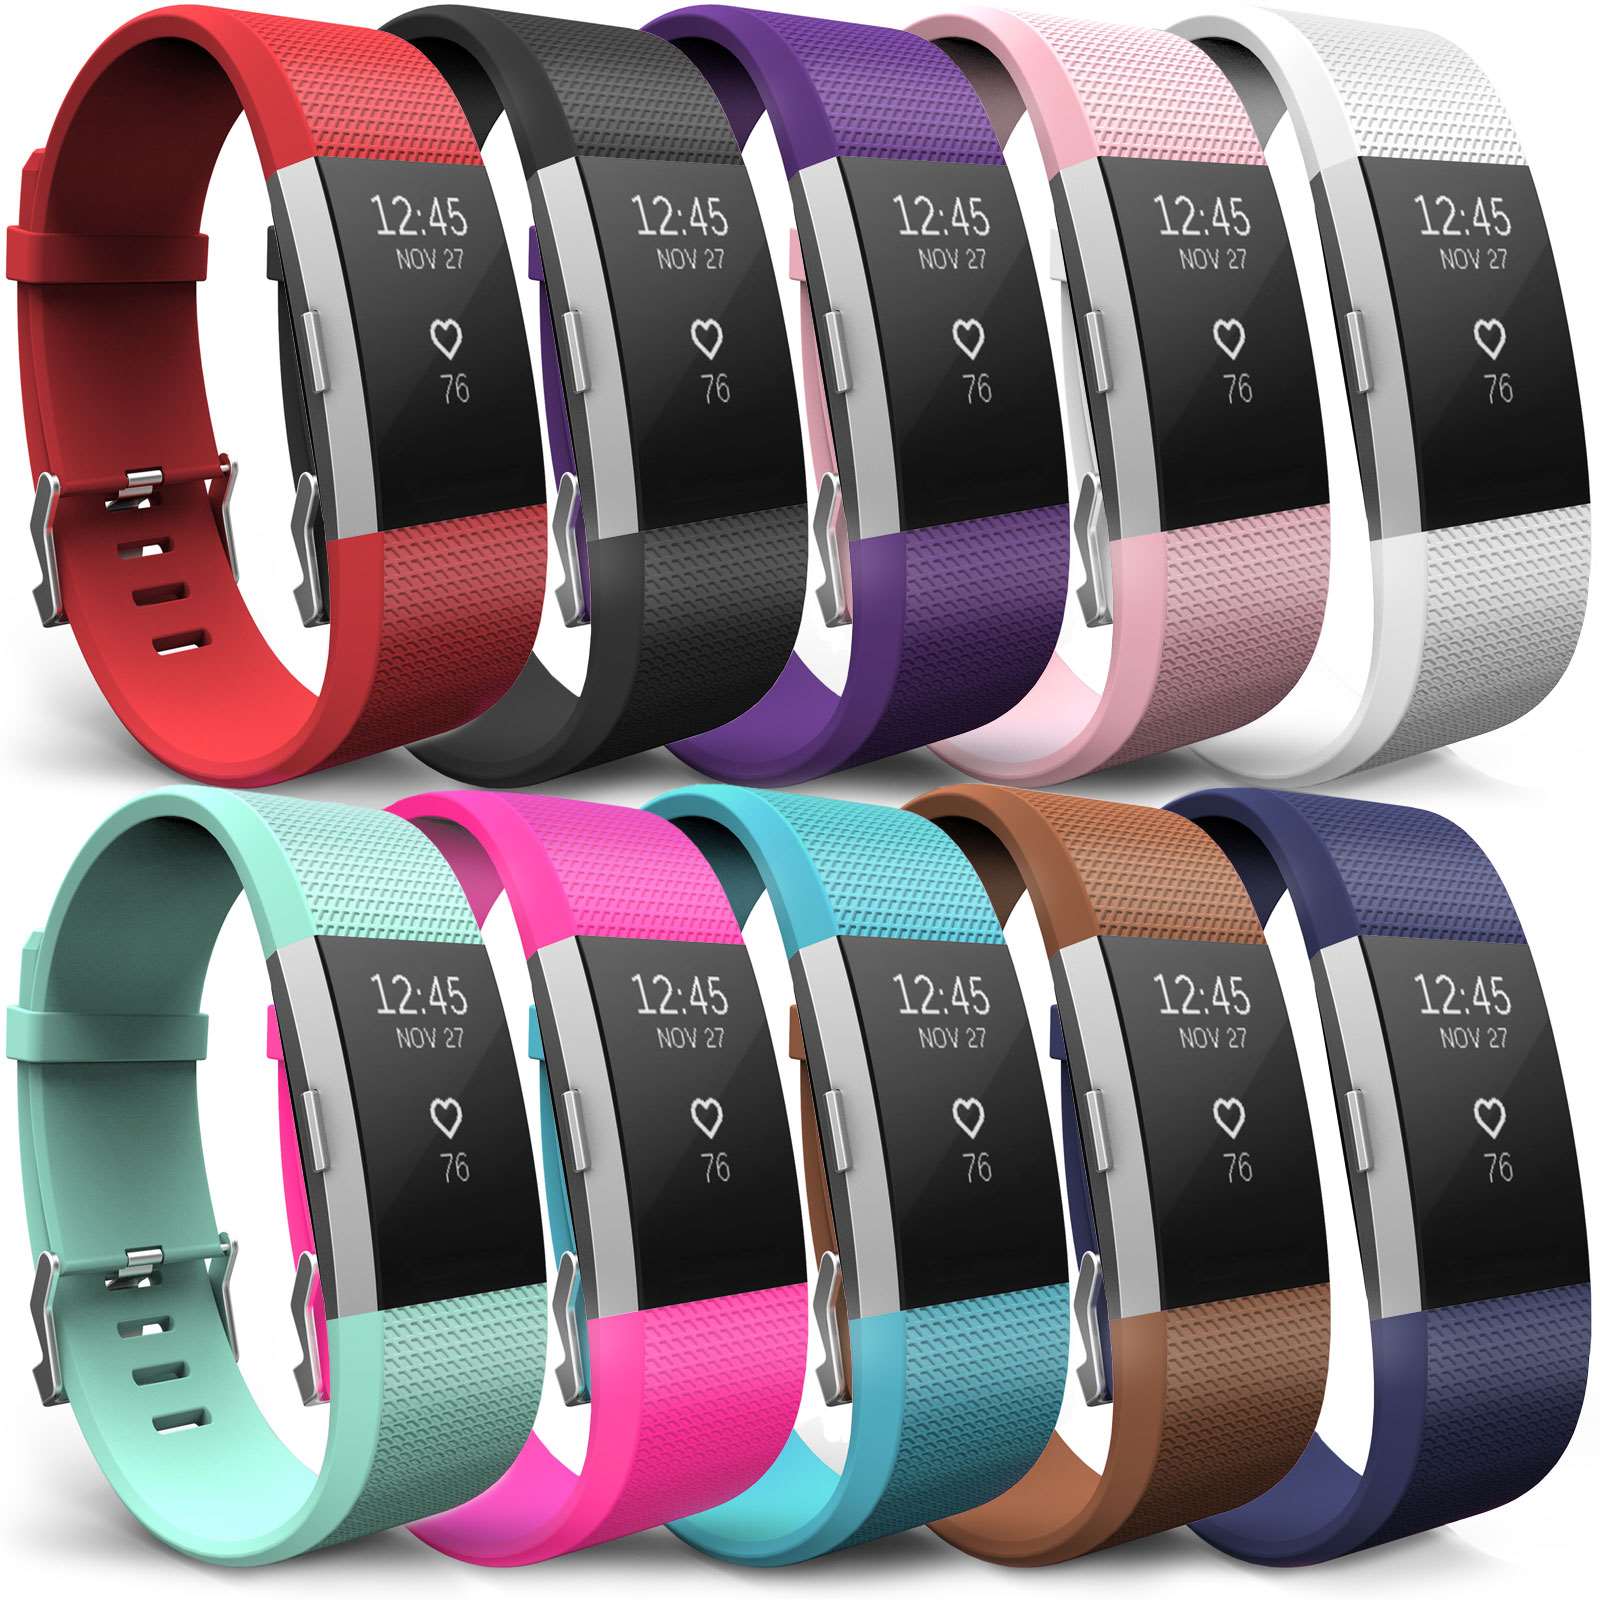 Yousave Fitbit Charge 2 Strap 10 Pack Small Red Black Plum Blush Pink White Mint Green Hot Pink Cyan Brown Dark Blue